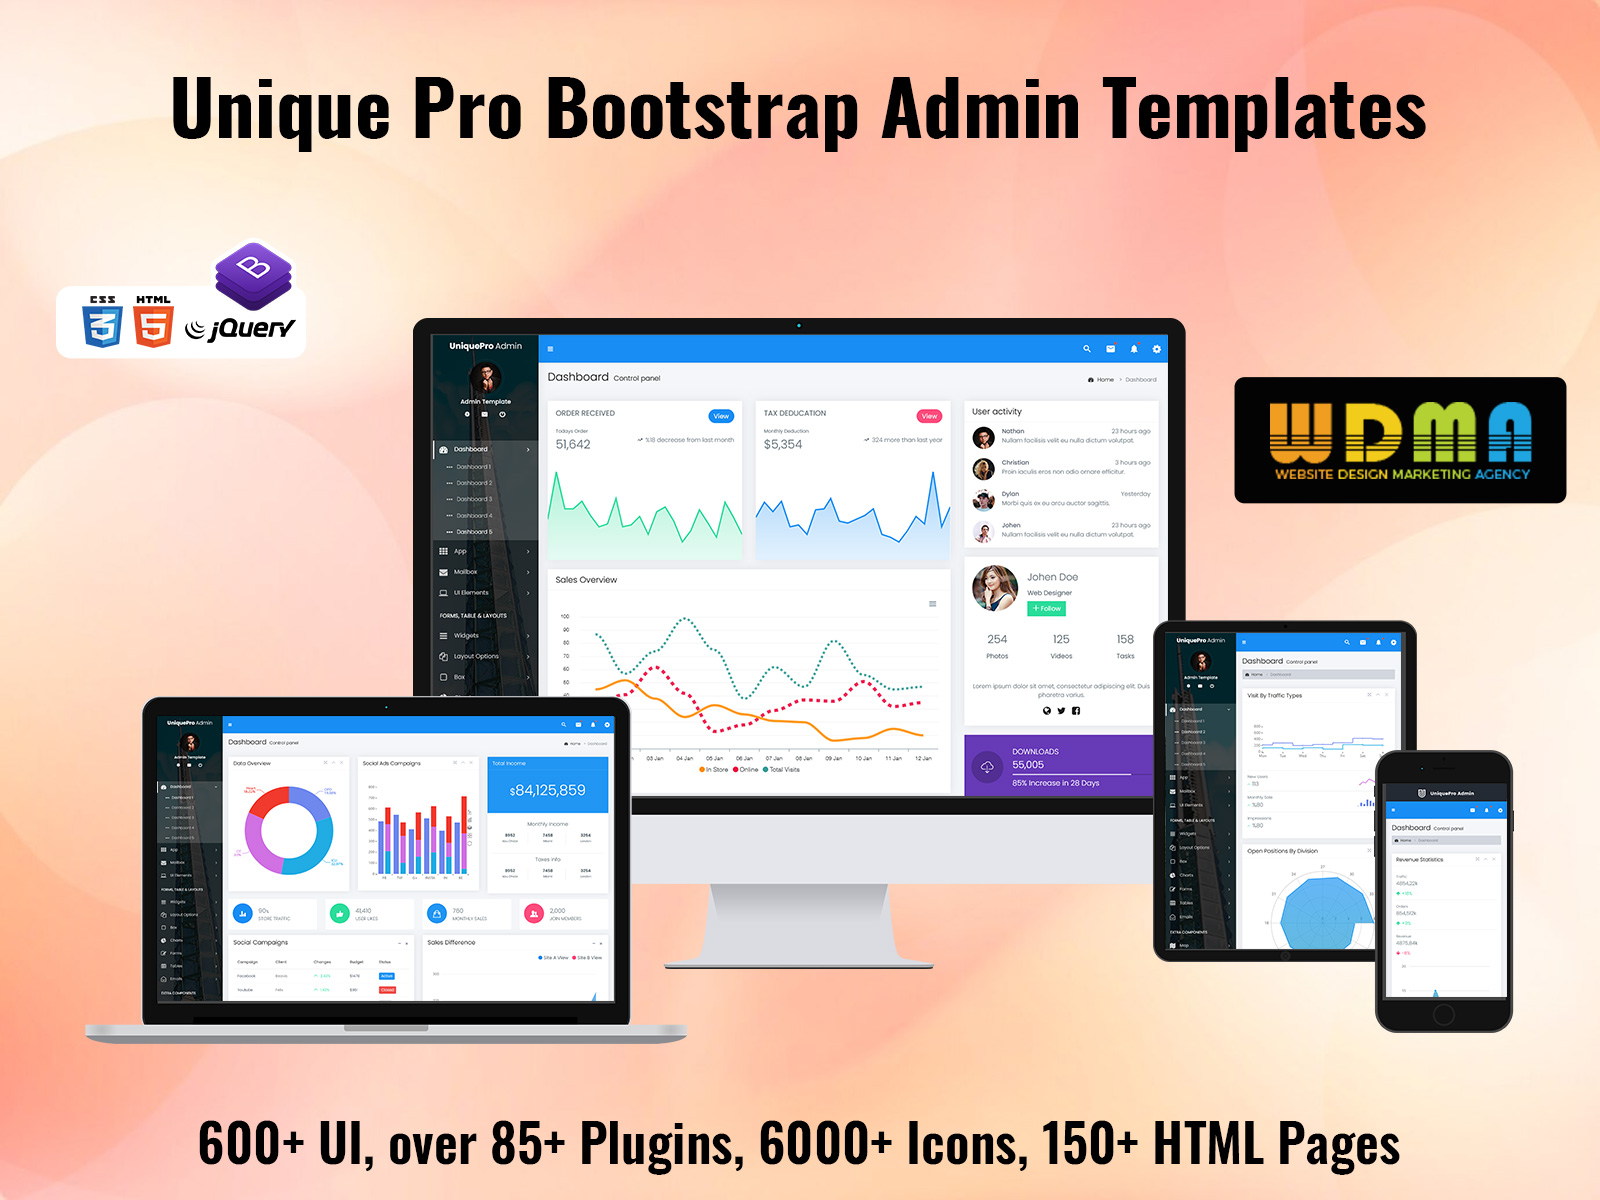 What Are The Benefits Of Using Unique Pro Bootstrap Admin Template?